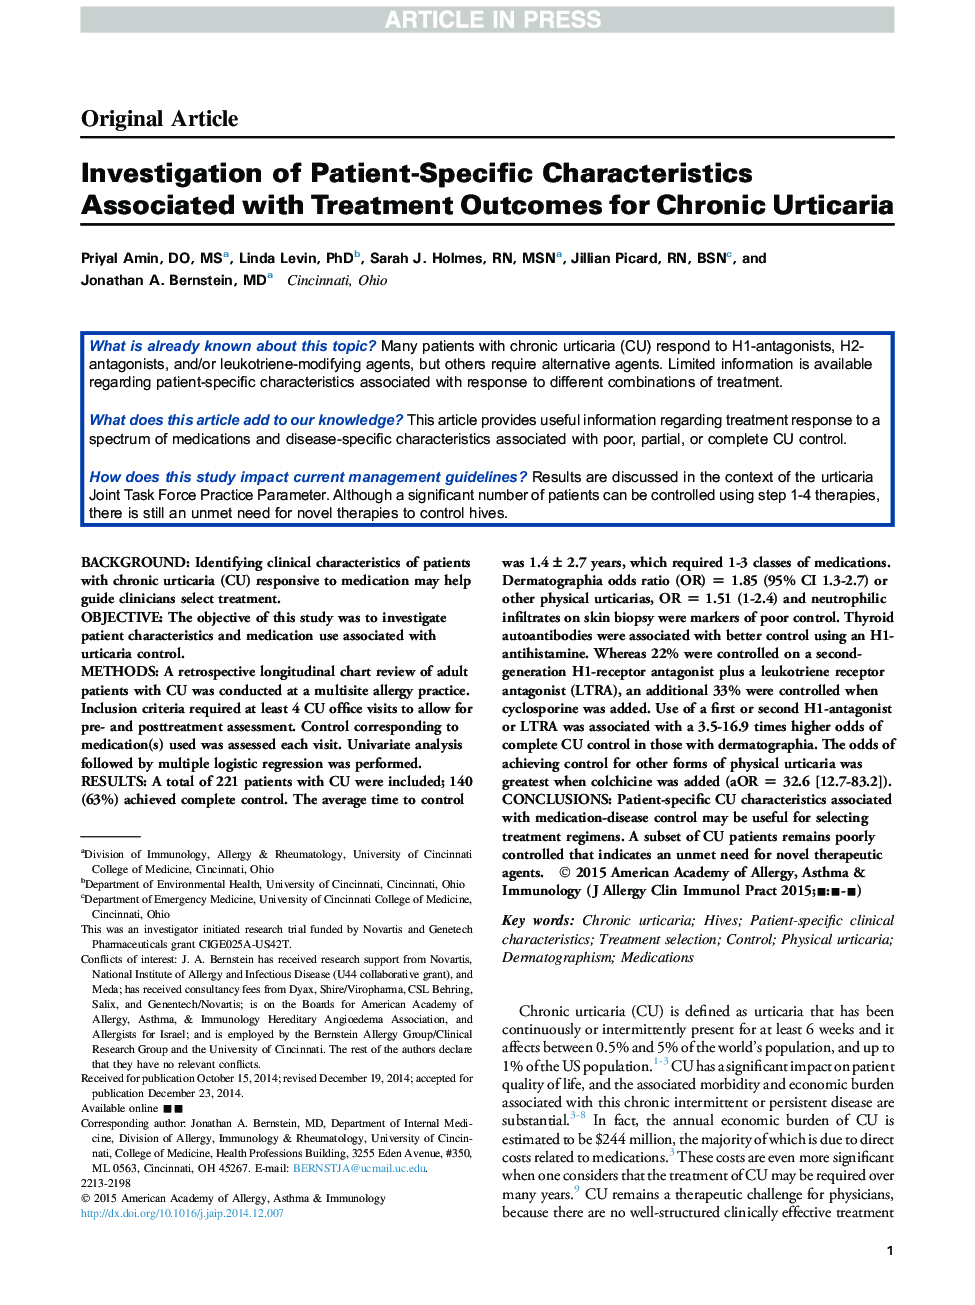 Investigation of Patient-Specific Characteristics Associated with Treatment Outcomes for Chronic Urticaria